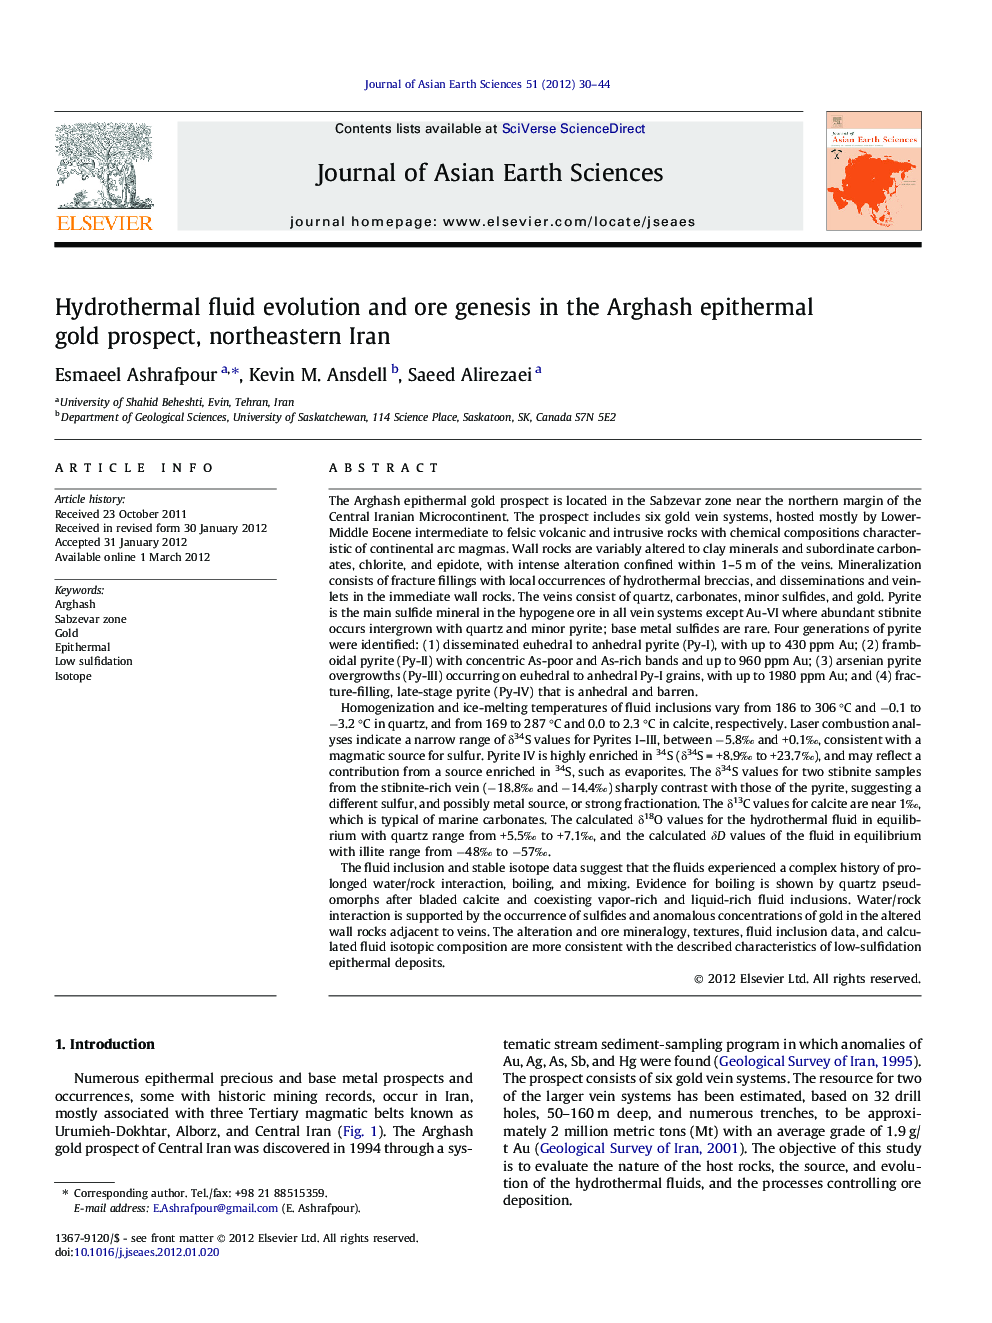 Hydrothermal fluid evolution and ore genesis in the Arghash epithermal gold prospect, northeastern Iran